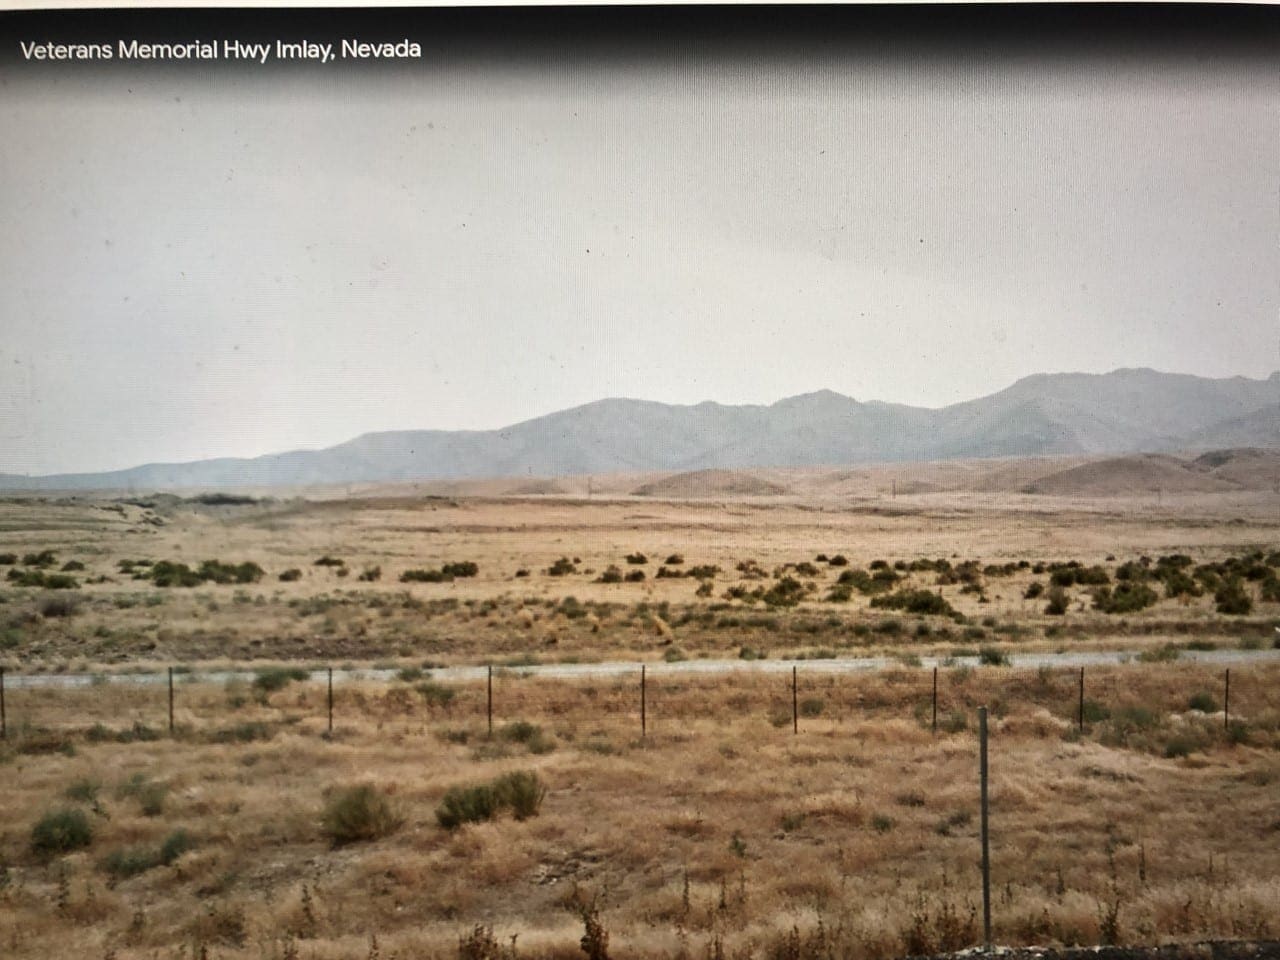 1.54 Acre Lot with Interstate 80 Frontage in Imlay, Nevada. Zoned AGRICULTURE – MINING – RECREATION. photo 10